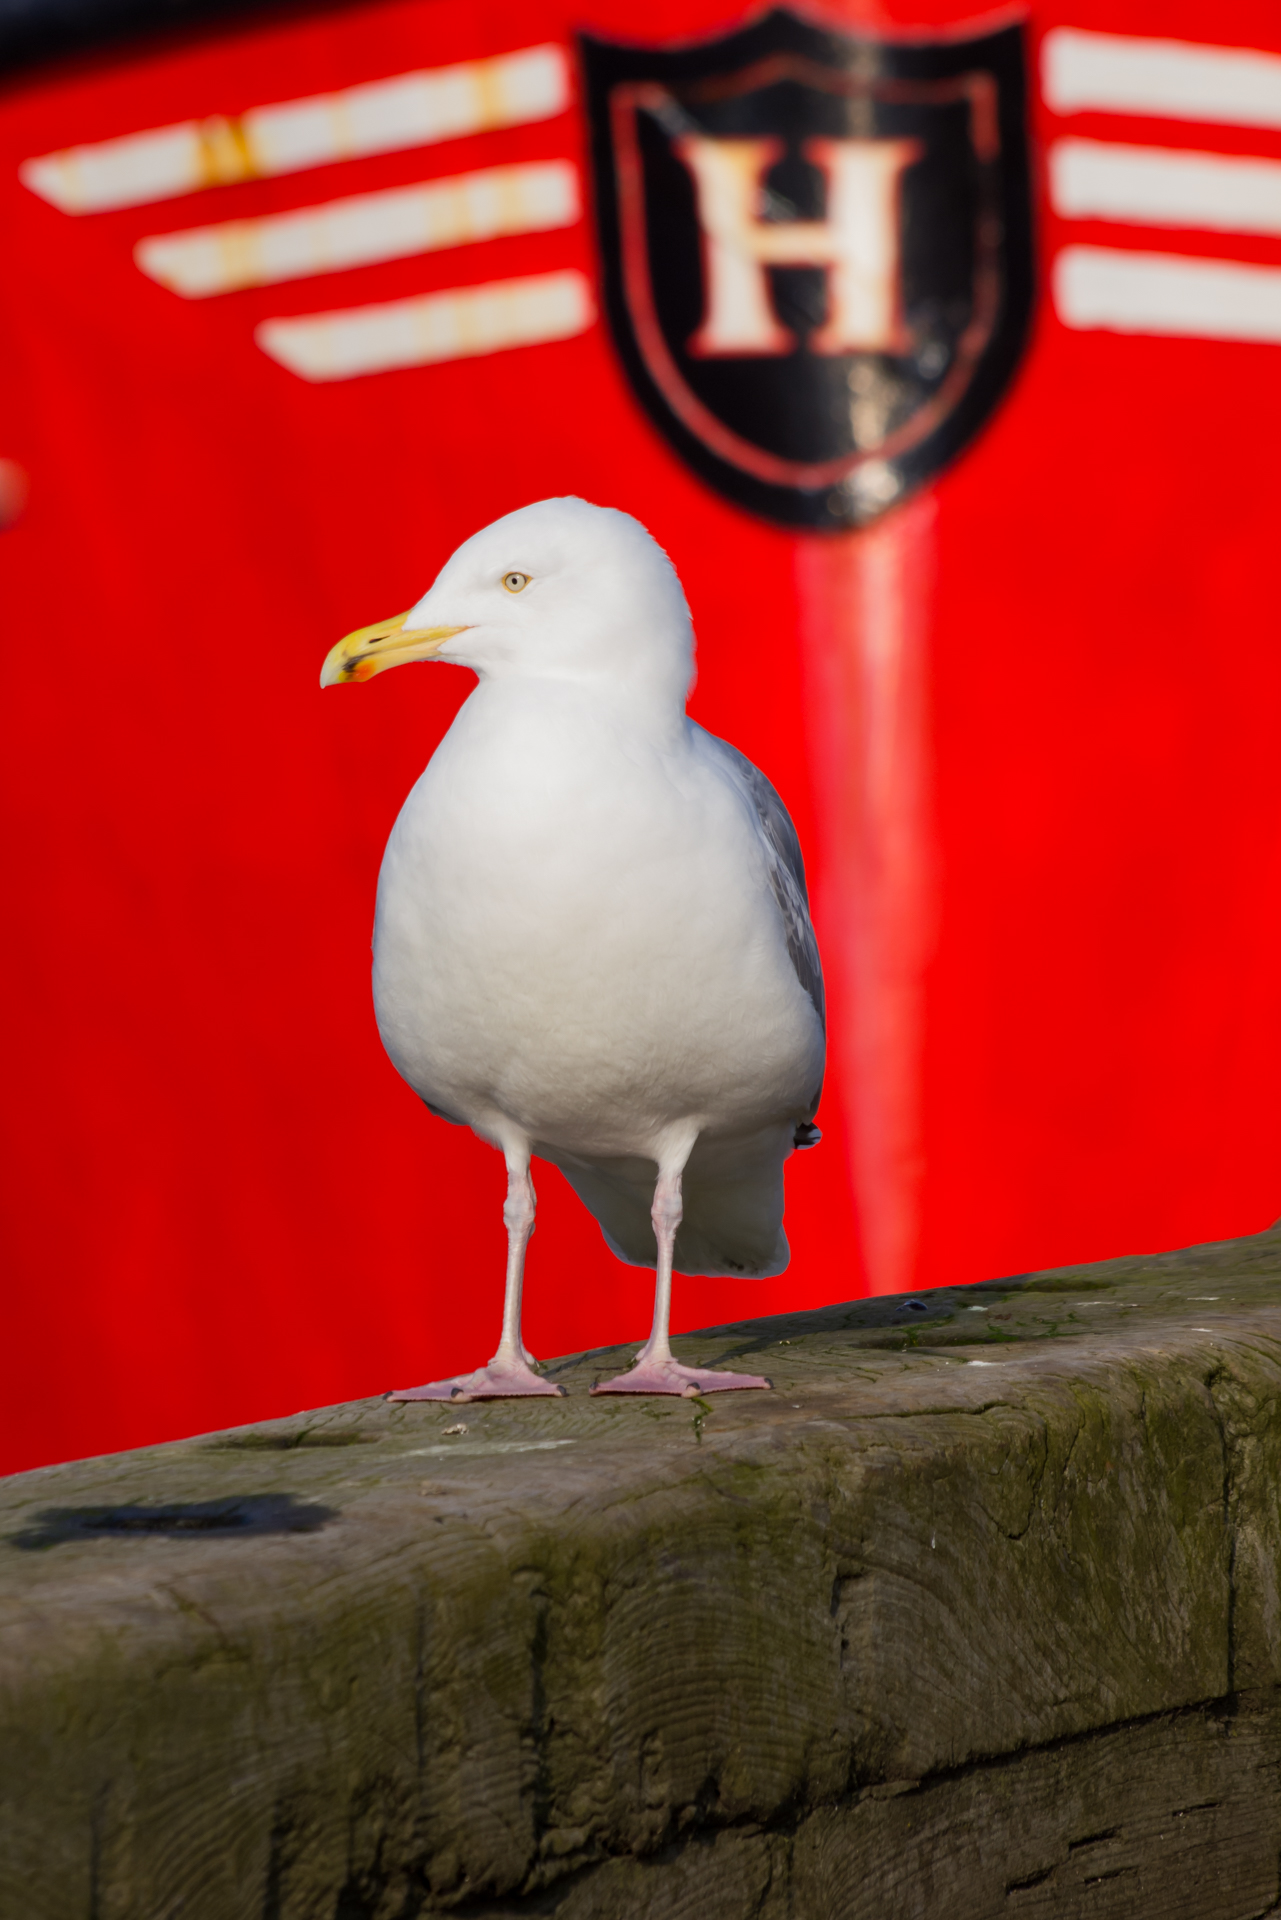 Herring gull in front of a red boat